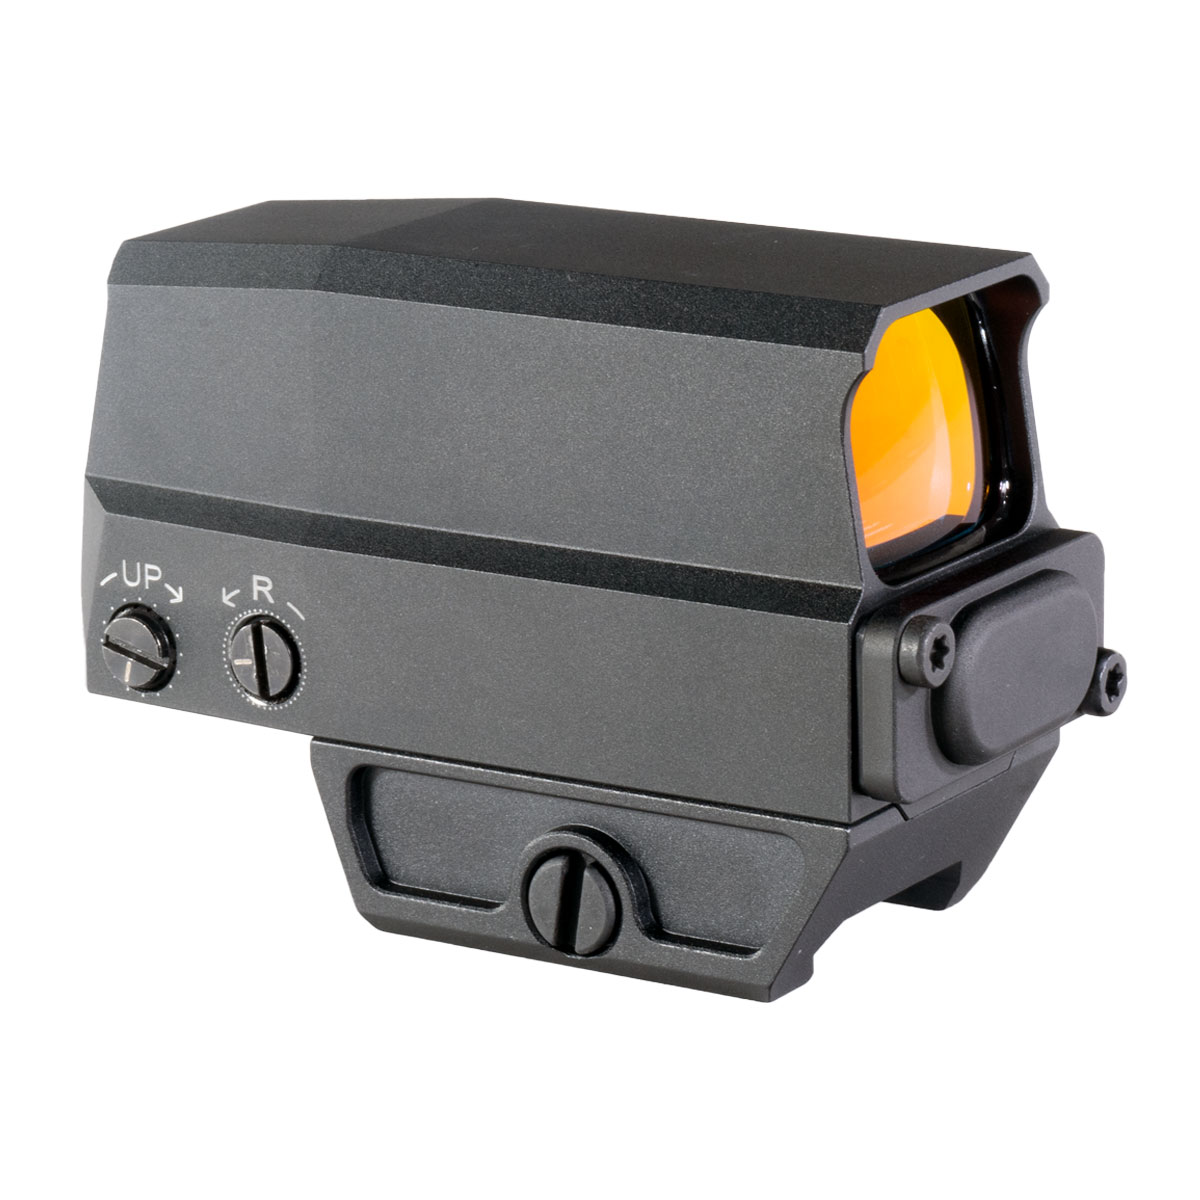 Closed Emitter Red Dot Sight, Circle Dot Reticle 50,000 Hour Battery Life- Includes 2 AA batteries and installation tools